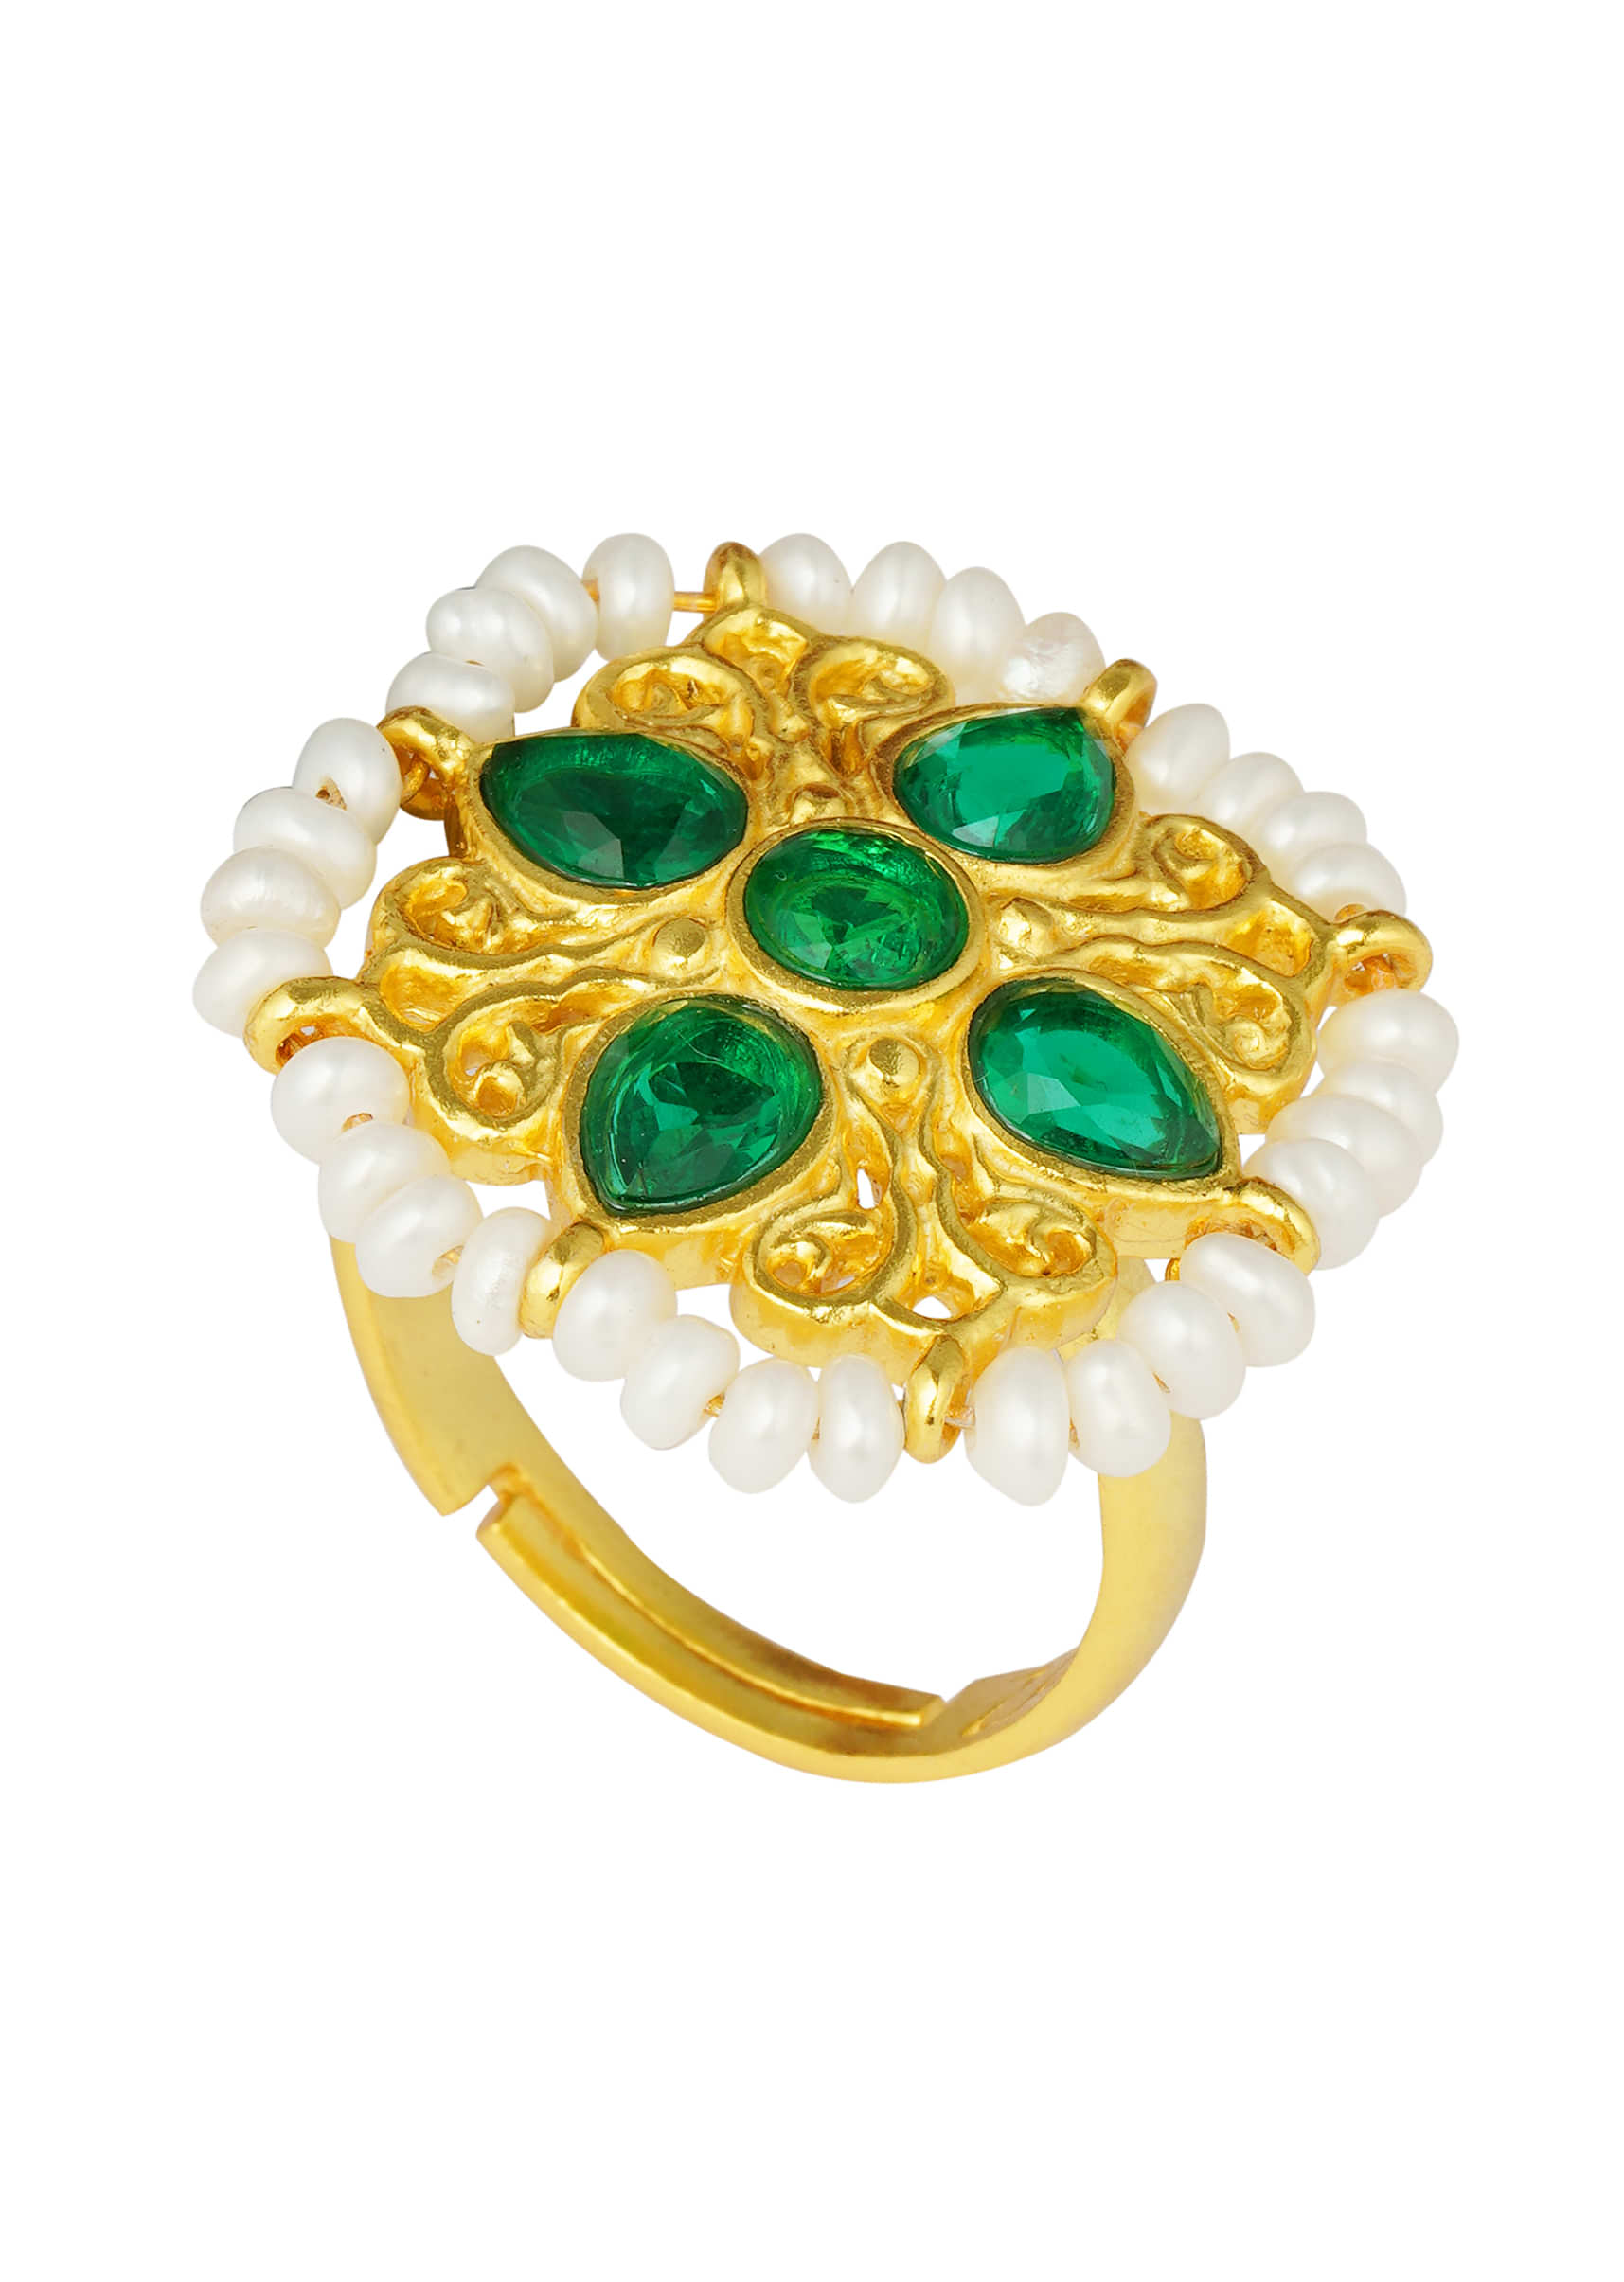 Green Stone Studded Ring In Four Petal Design With Pearls Around The Edge By Zariin